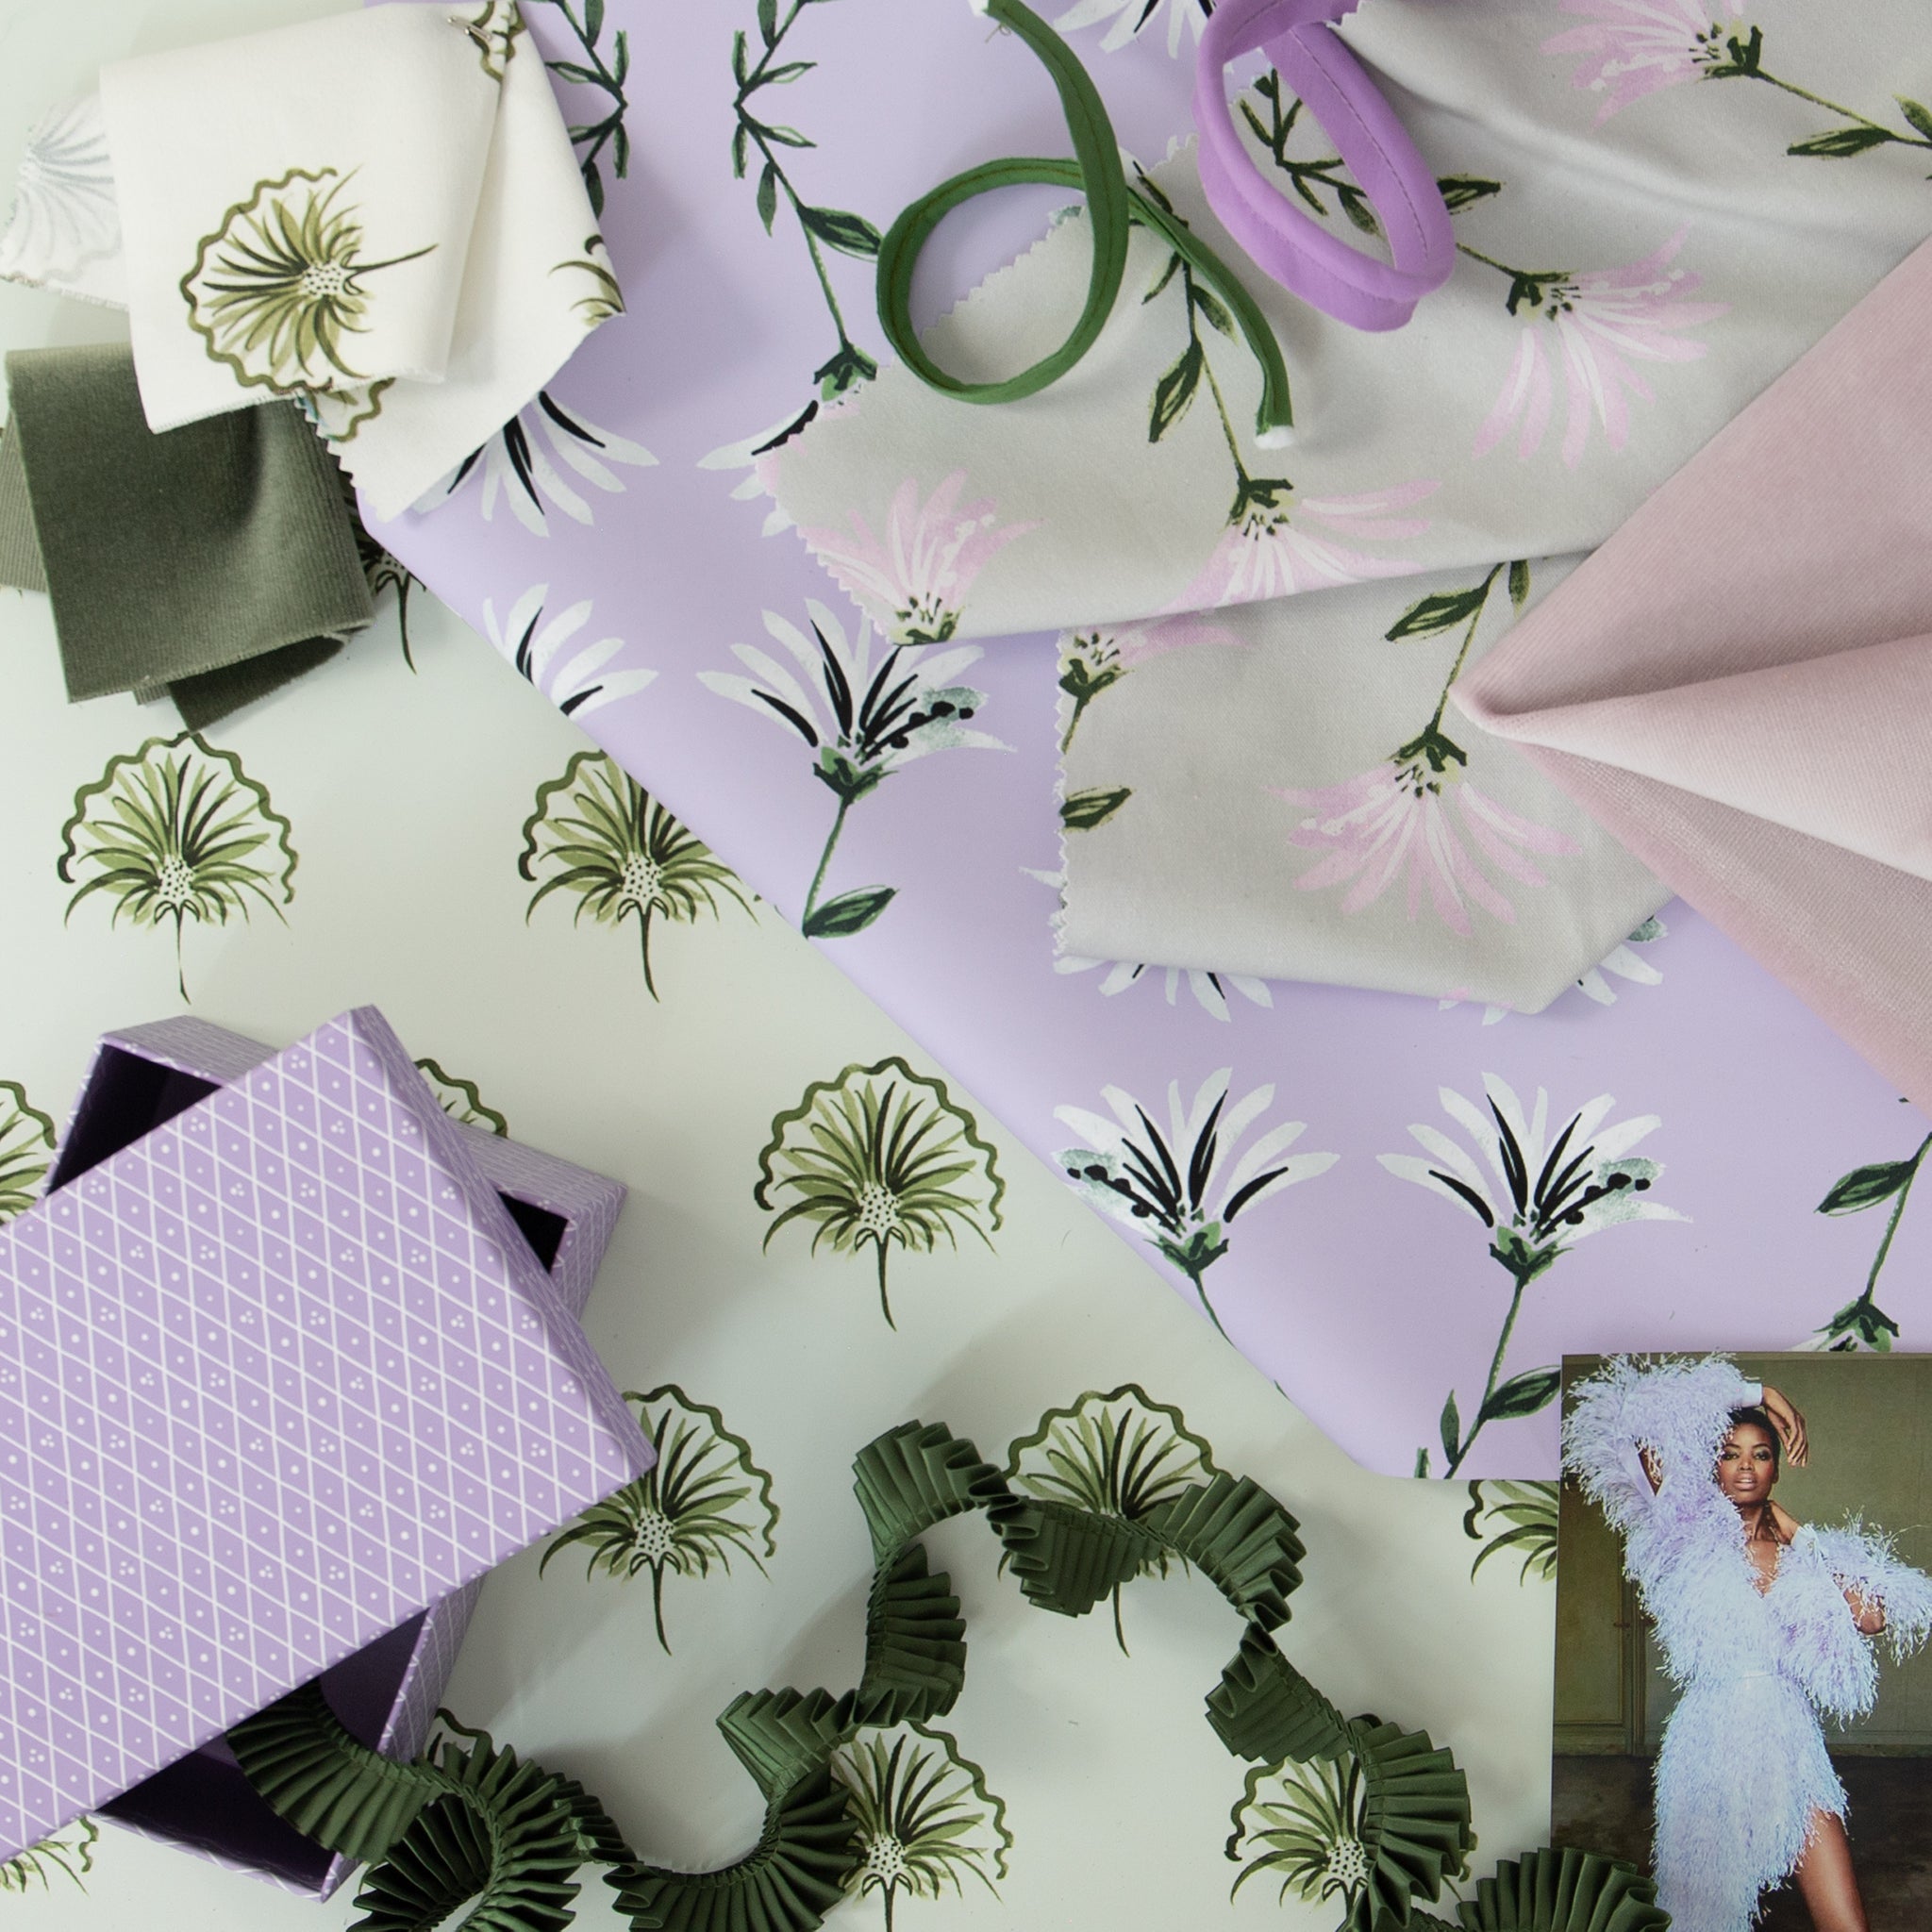 Interior design moodboard and fabric inspirations with Green Floral Printed Swatch, Pink Velvet Swatch, and Botanical Ikat Printed Swatch